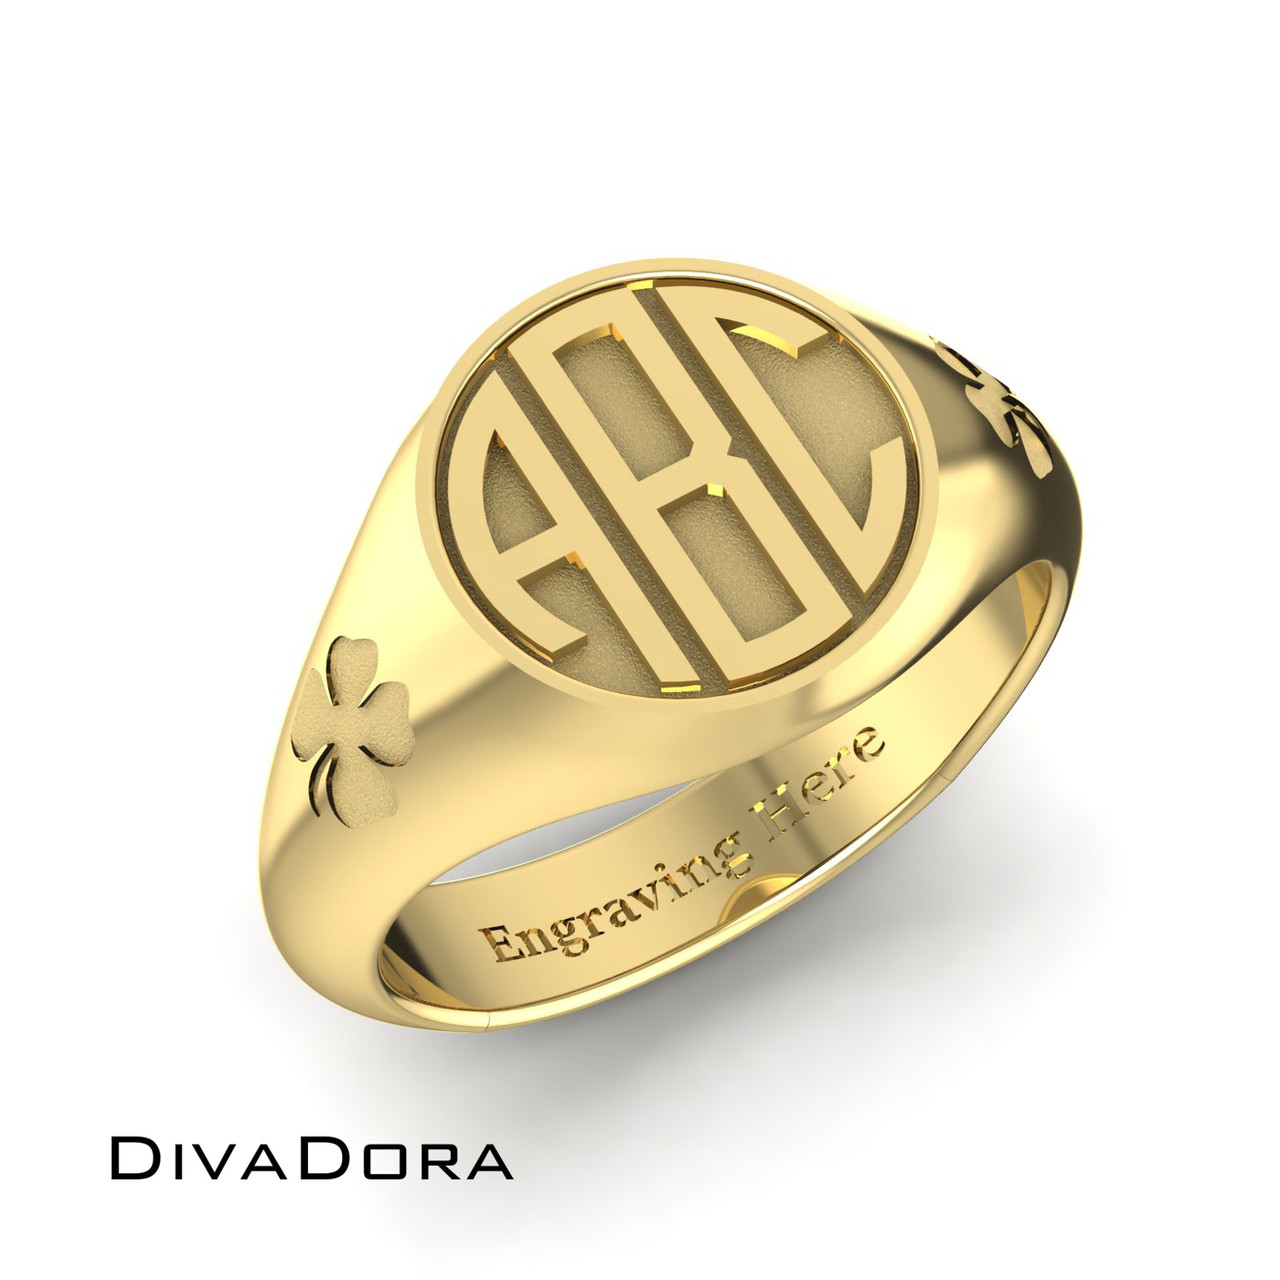 Monogrammed Signet ring - Personalized engraved Solid Sterling Silver  signature statement ring - US sizes 4 5 6 7 8 9 Monogram